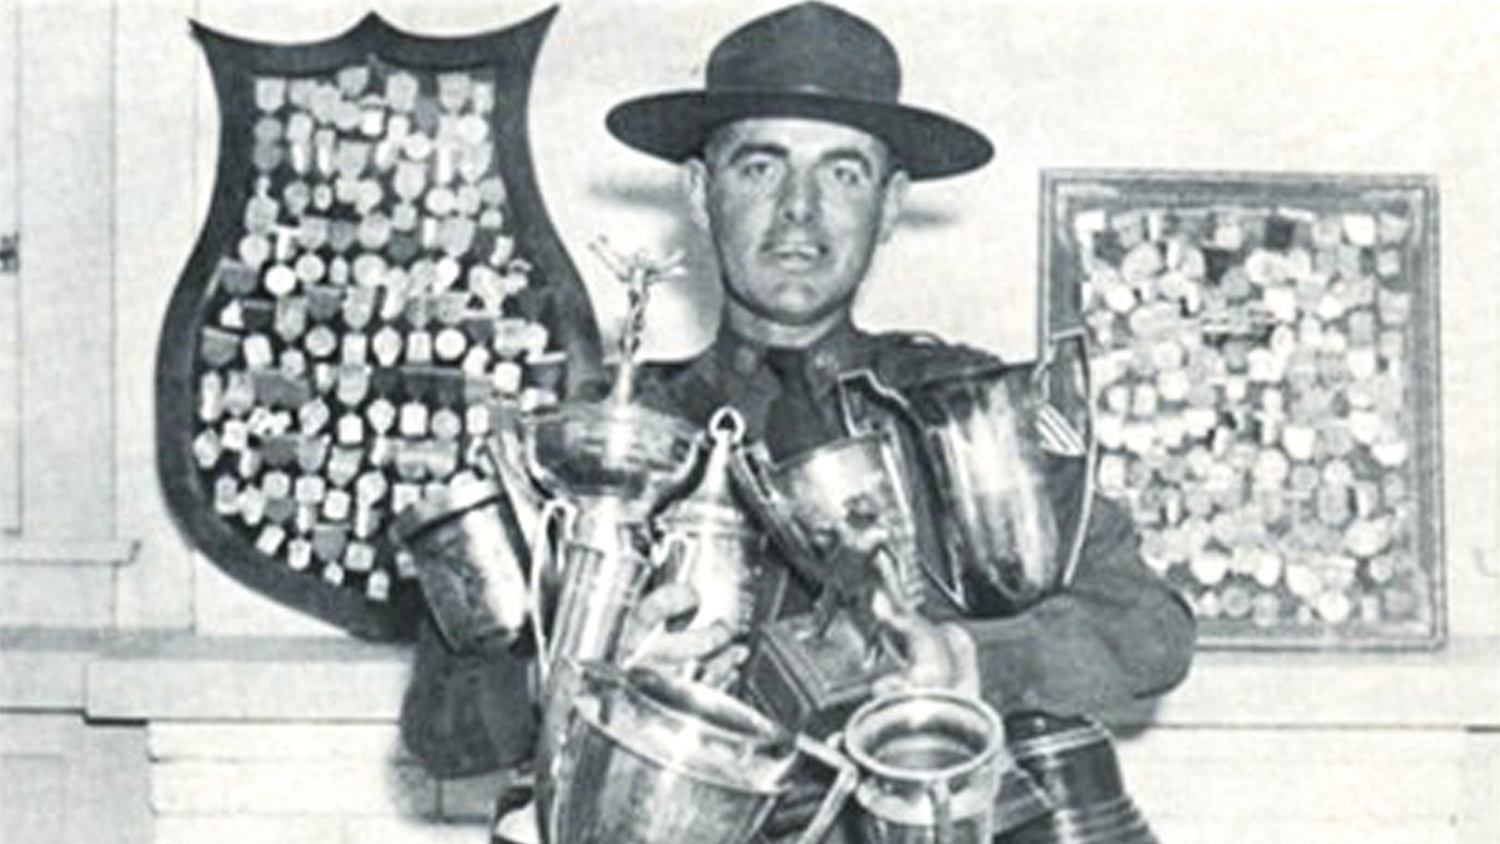 Legendary competitor Col. Charles Askins holding an armful of trophies at Camp Perry in 1937.